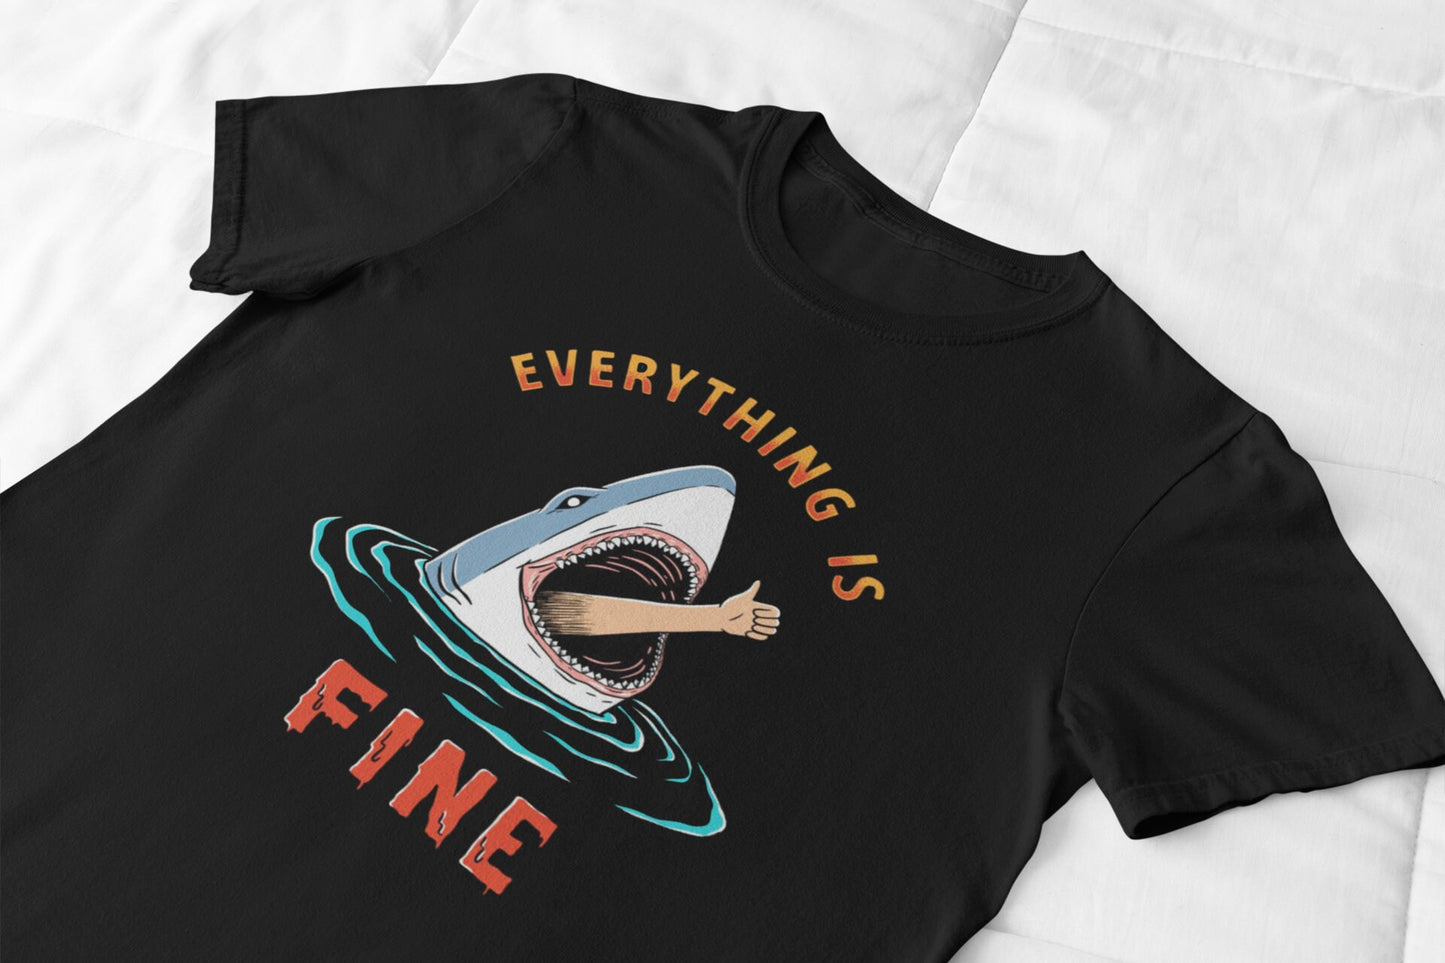 Everything Is Fine T-Shirt